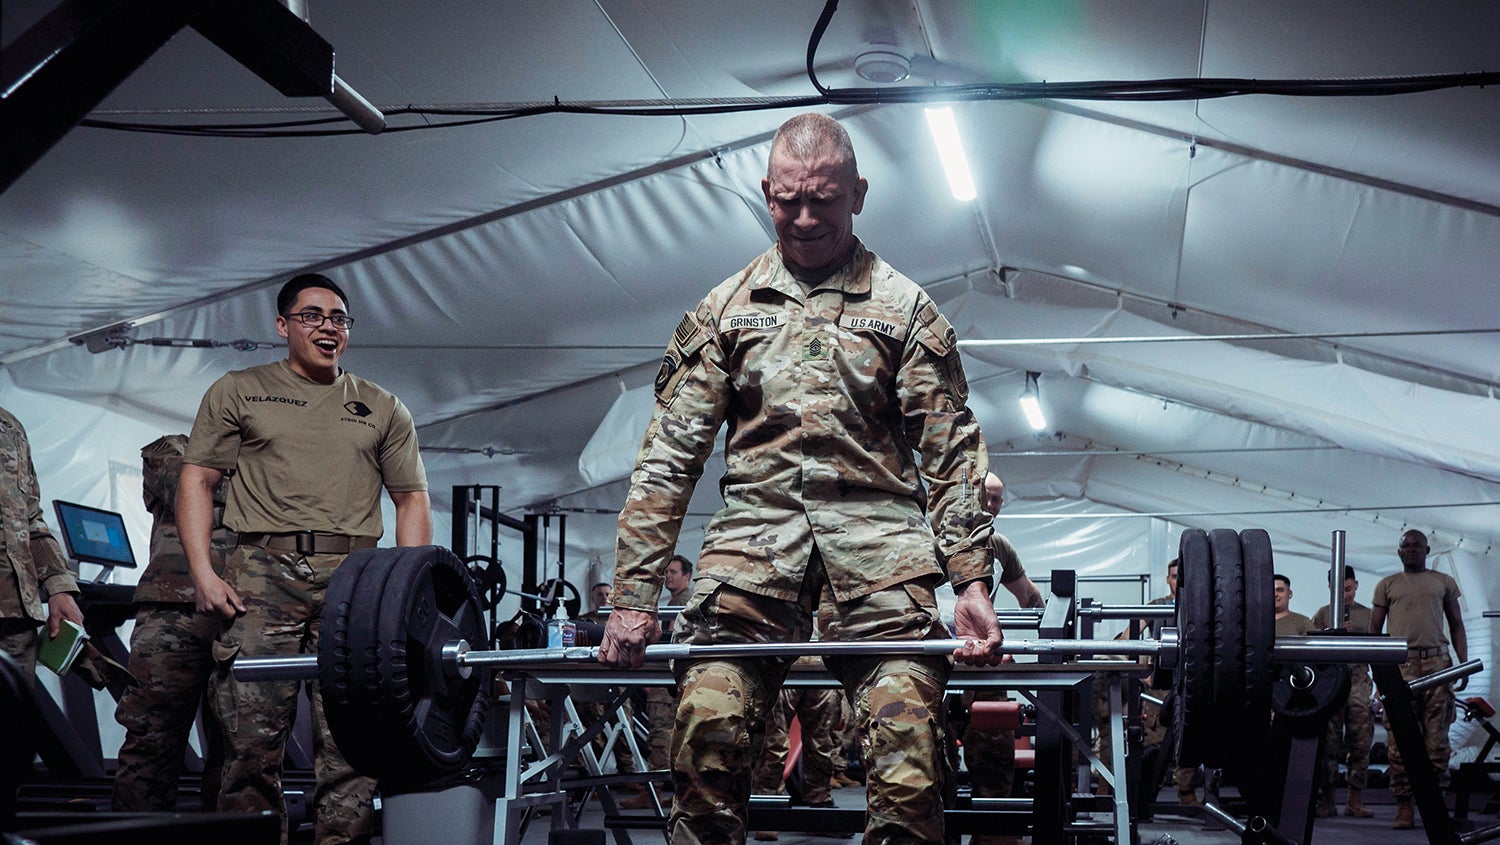 Sgt. Maj. of the Army Michael Grinston does some deadlifts during a visit to Camp Herkus, Lithuania. (Credit: U.S. Army)